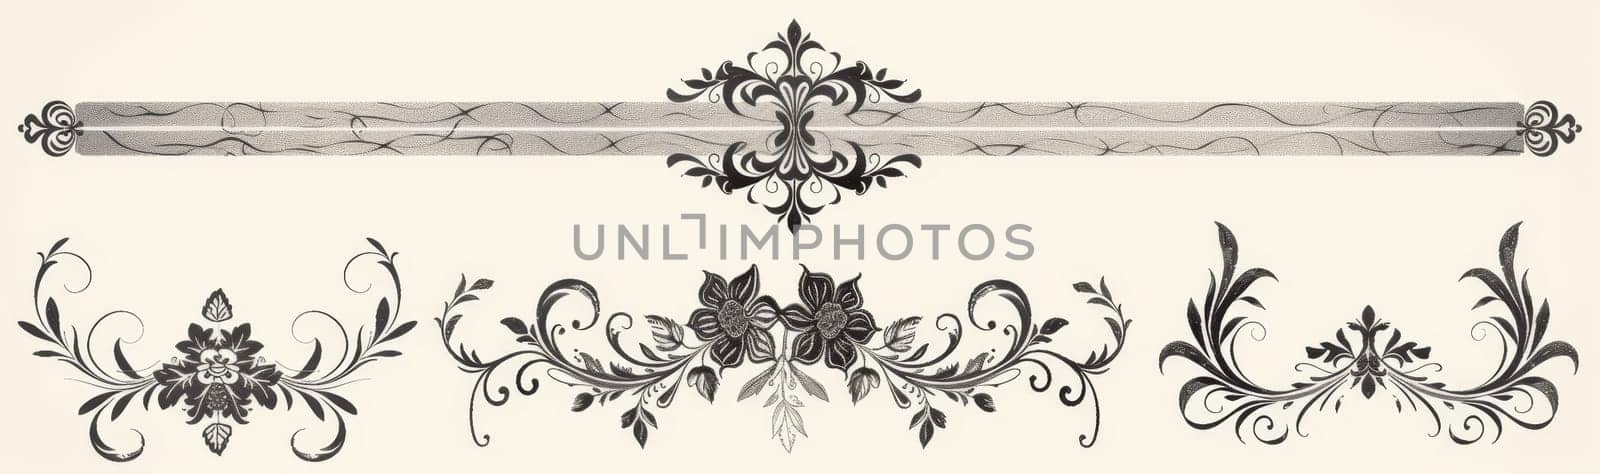 Wide, panoramic vintage ornamental design with intricate floral patterns on a cream background. by sfinks